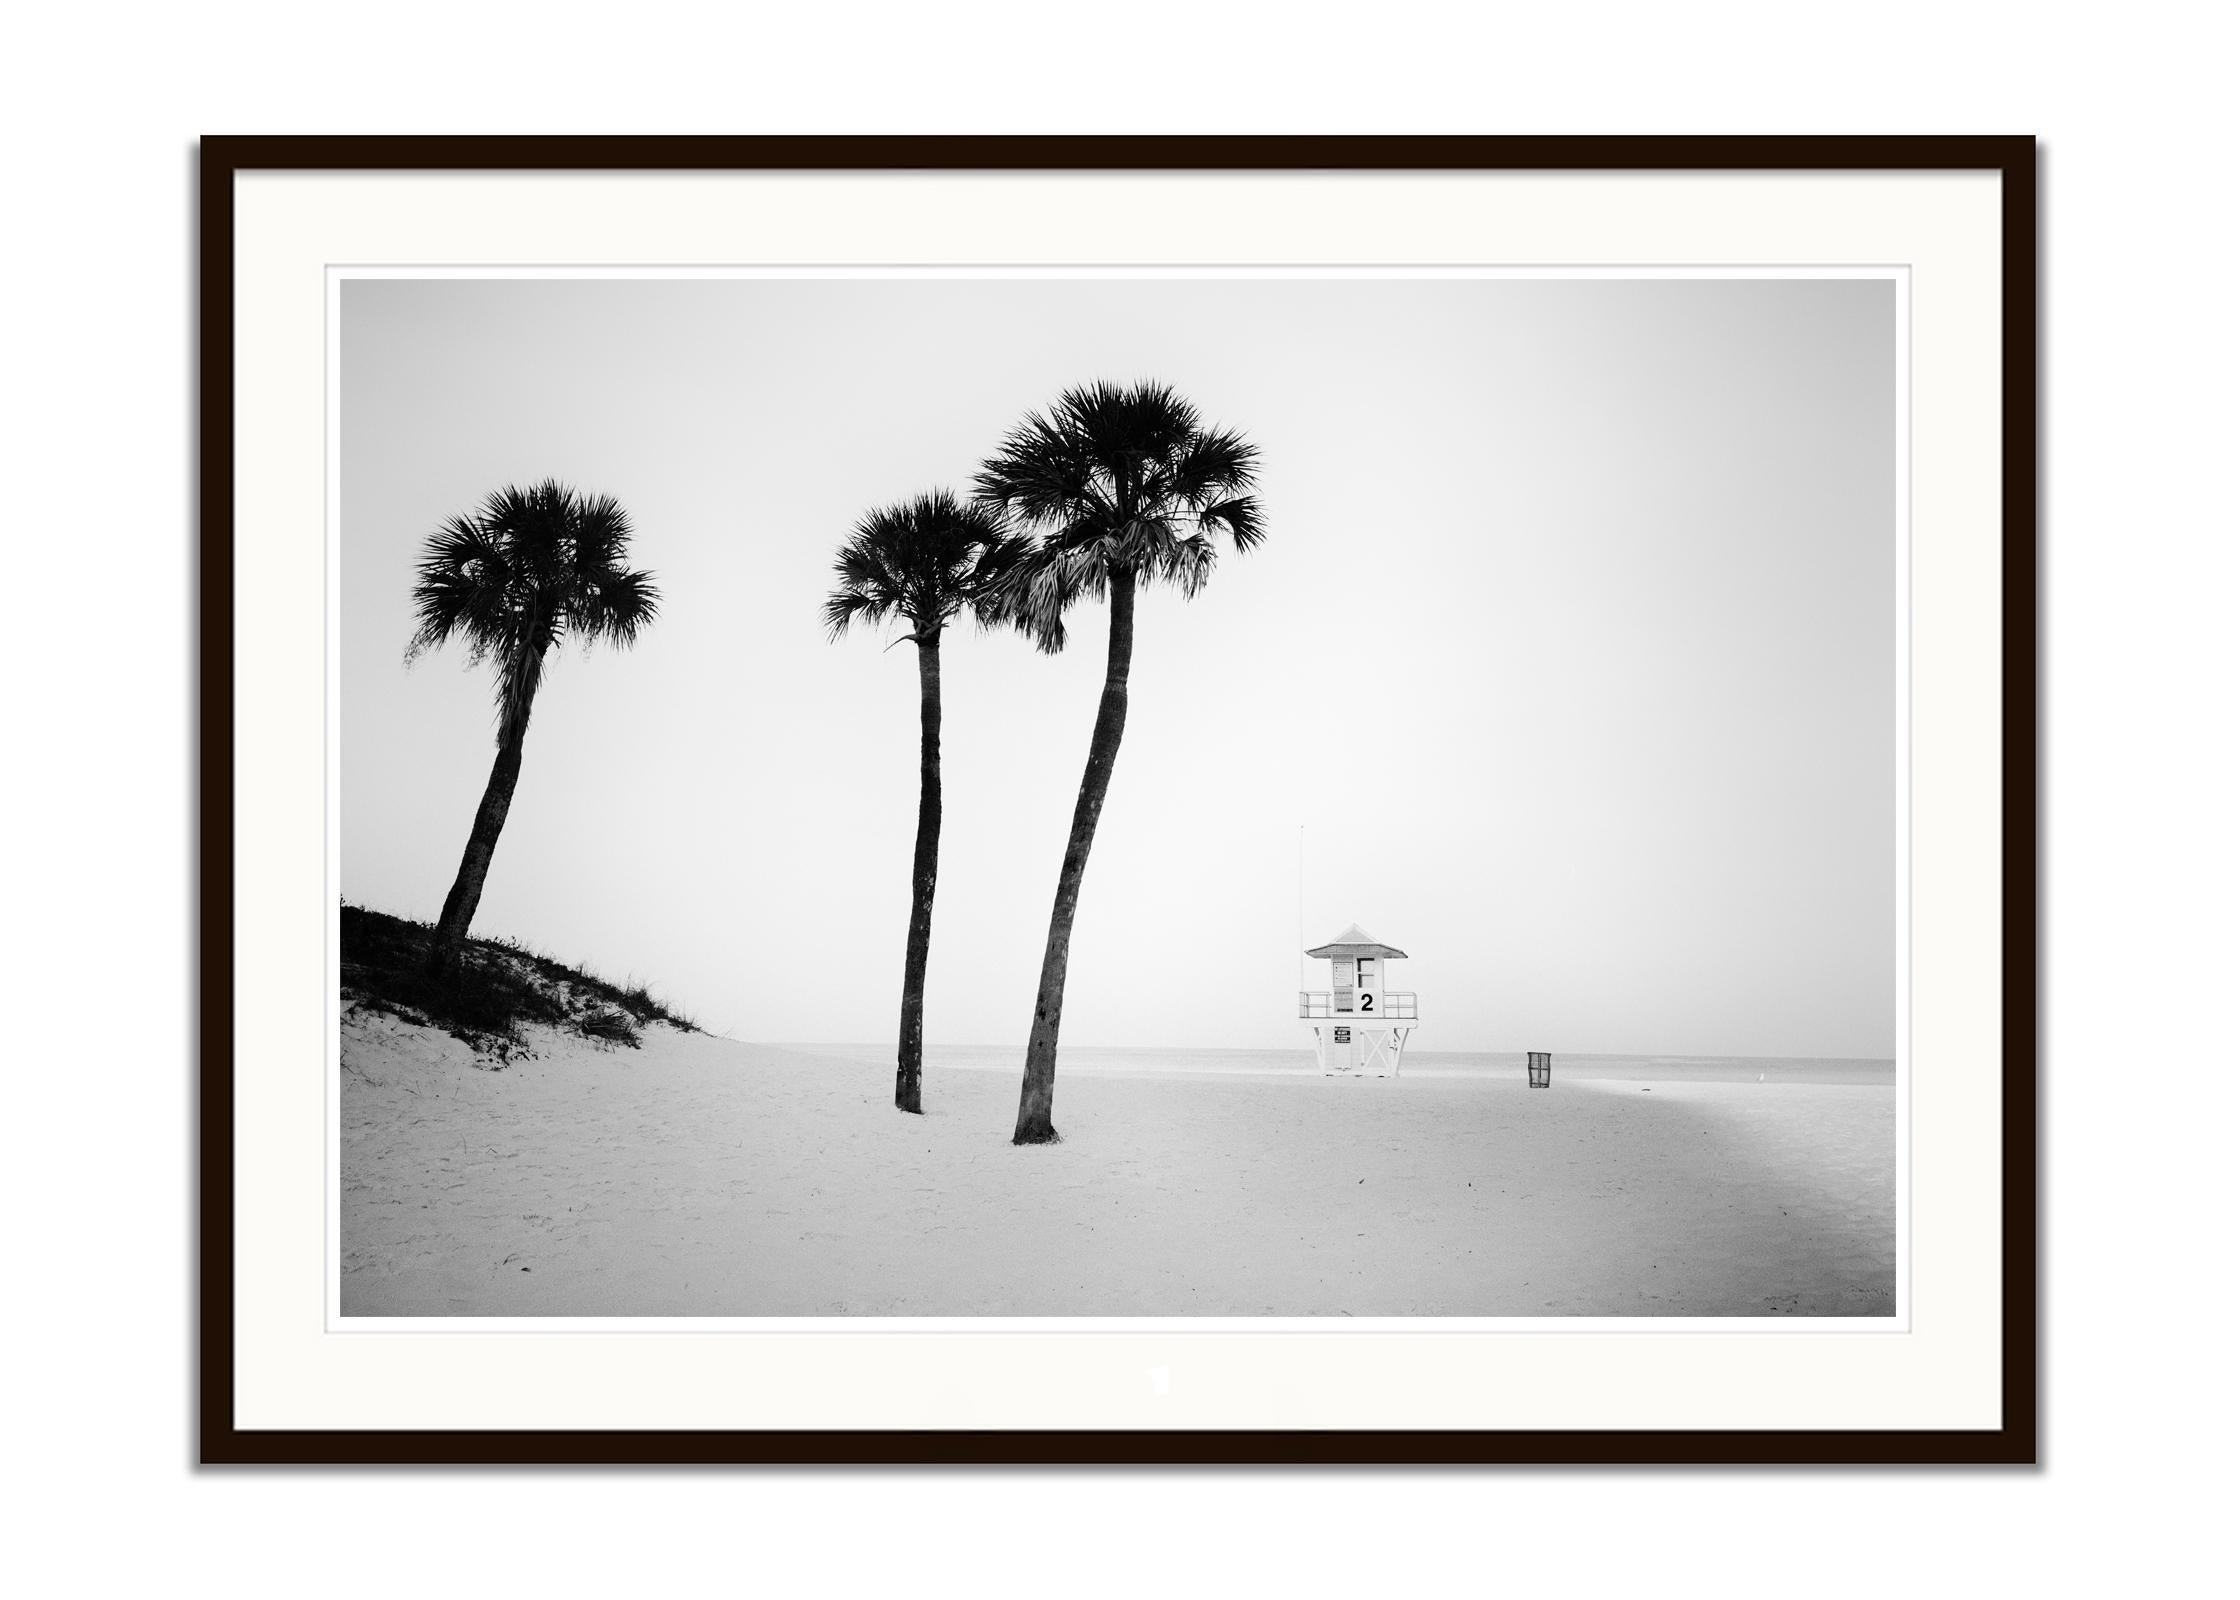 Lifeguard Tower, Miami Beach, Florida, USA, black & white landscape photography - Contemporary Photograph by Gerald Berghammer